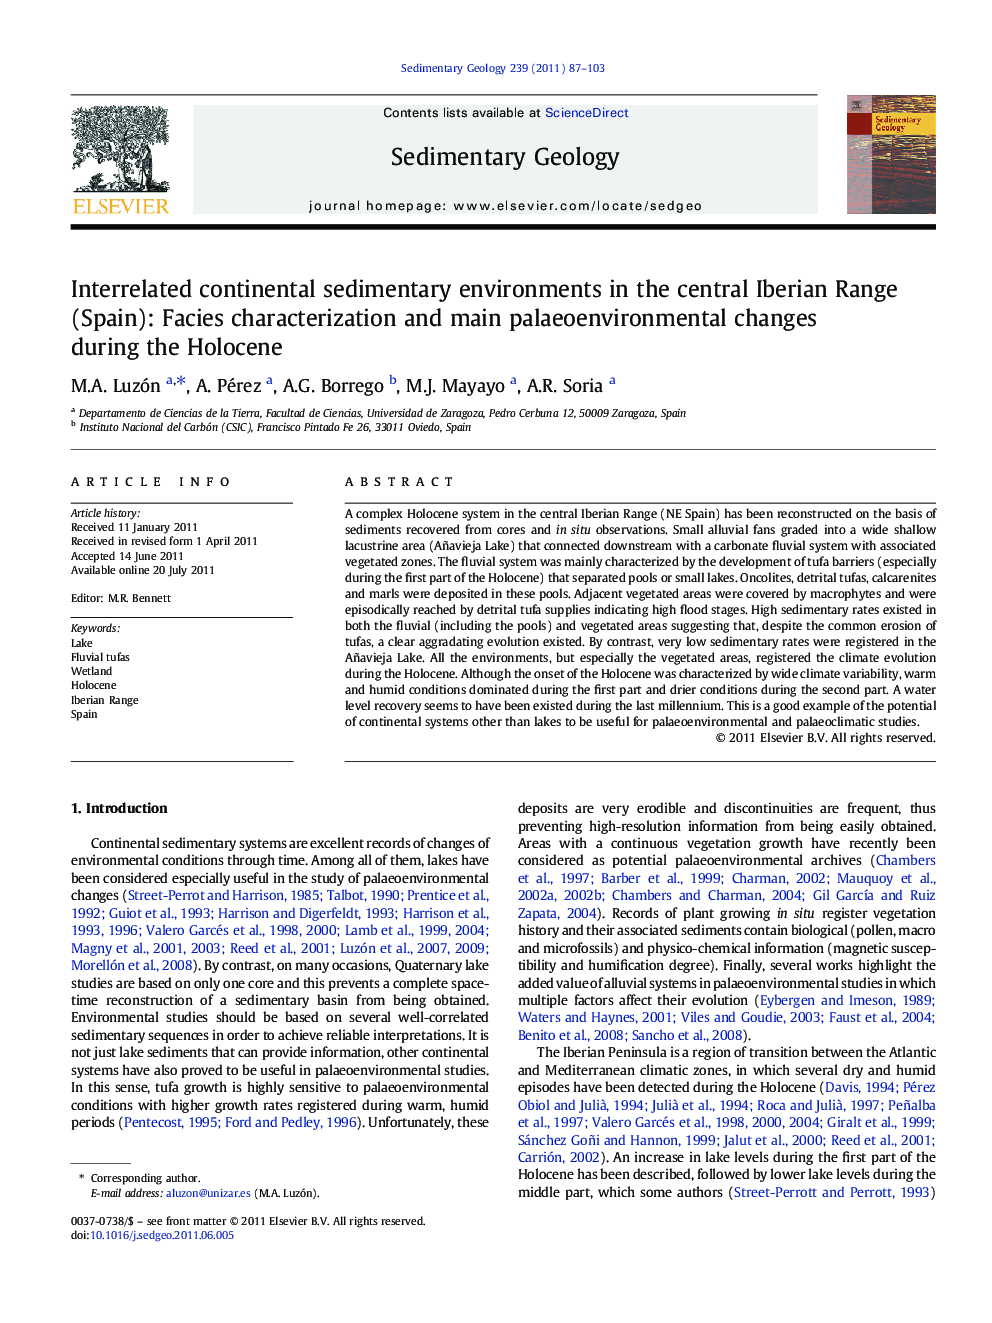 Interrelated continental sedimentary environments in the central Iberian Range (Spain): Facies characterization and main palaeoenvironmental changes during the Holocene